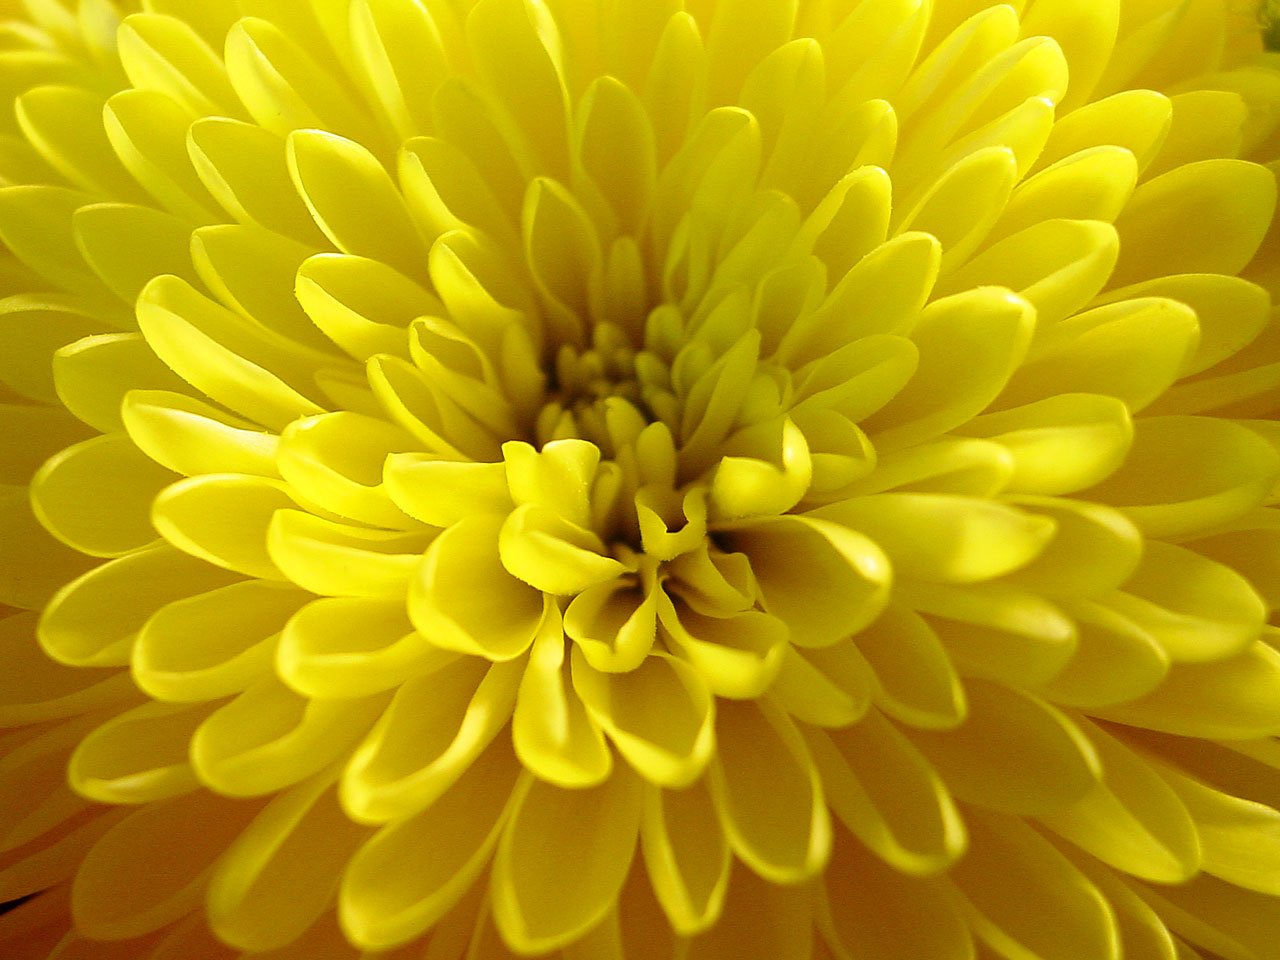 a yellow flower is close up on the petals